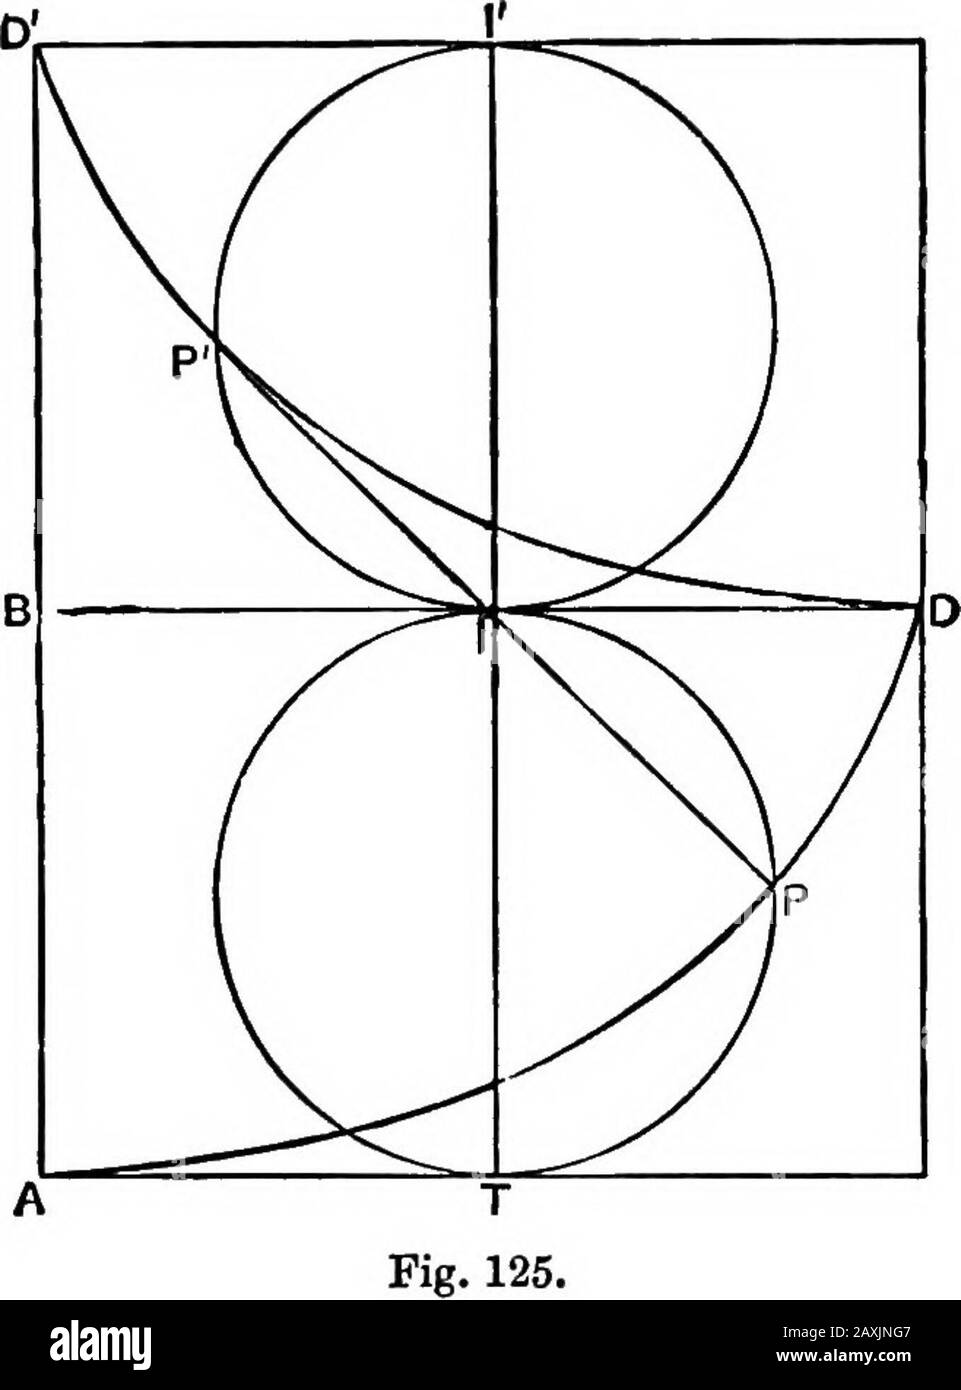 An elementary course of infinitesimal calculus . nts A, B, A, B areE, F, E, F, respectively. Ex. 3. To find the evolute of a cycloid. At any point P on the cycloid APB (Fig. 125), we have, byArt. 151, Ex. 2, p = 2PI (14). Let the axis AB be produced to D, so that BD = AB; andproduce TI to meet a parallel to BI, drawn through D, in /.If a circle be described on // as diameter, and PI be producedto meet the circumference in P, we have PI=PI, so that P isthe centre of curvature of the cycloid at P. And since the arcPi is equal to the arc TP, and therefore to BI or Dl, thelocus of P is evidently t Stock Photo